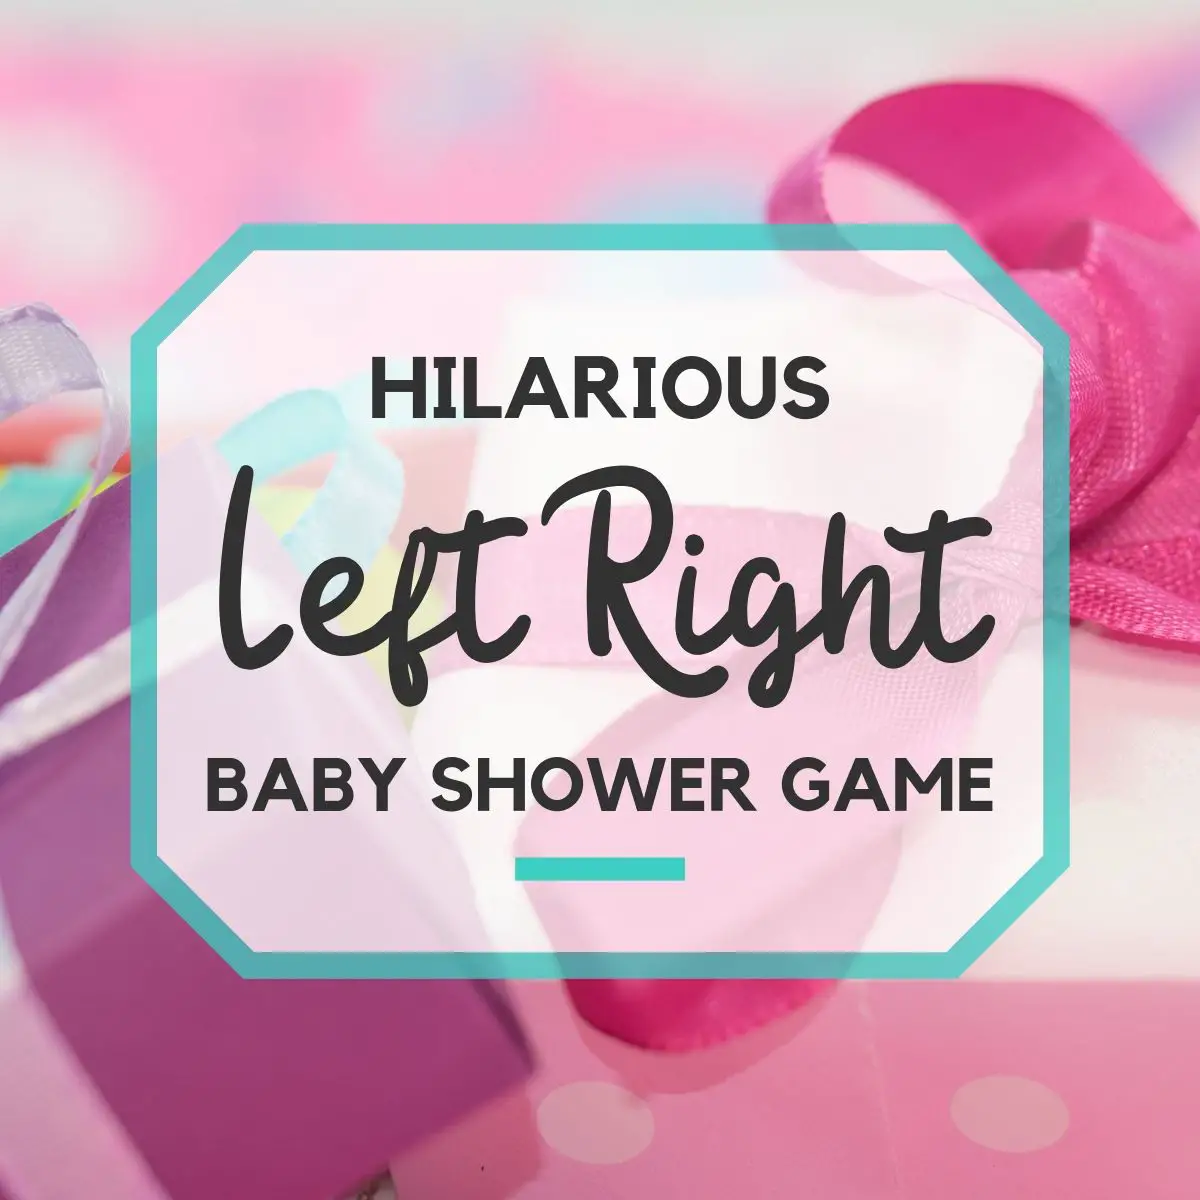 Mrs right baby mr game right shower Best Baby